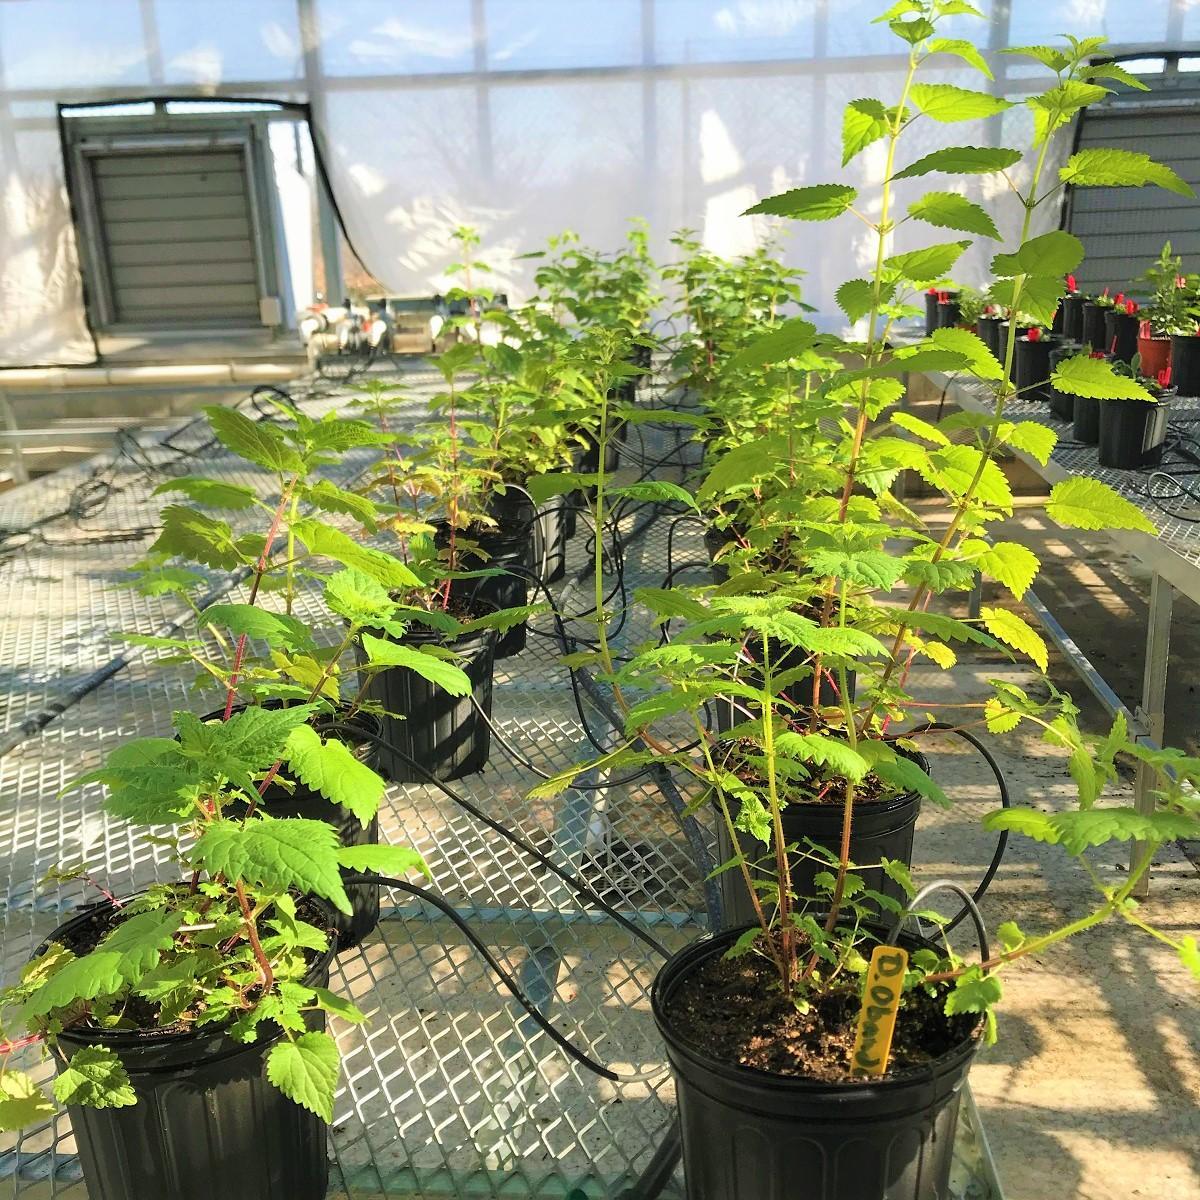 Mature nettle plants growing at the UMD Research Greenhouse Complex